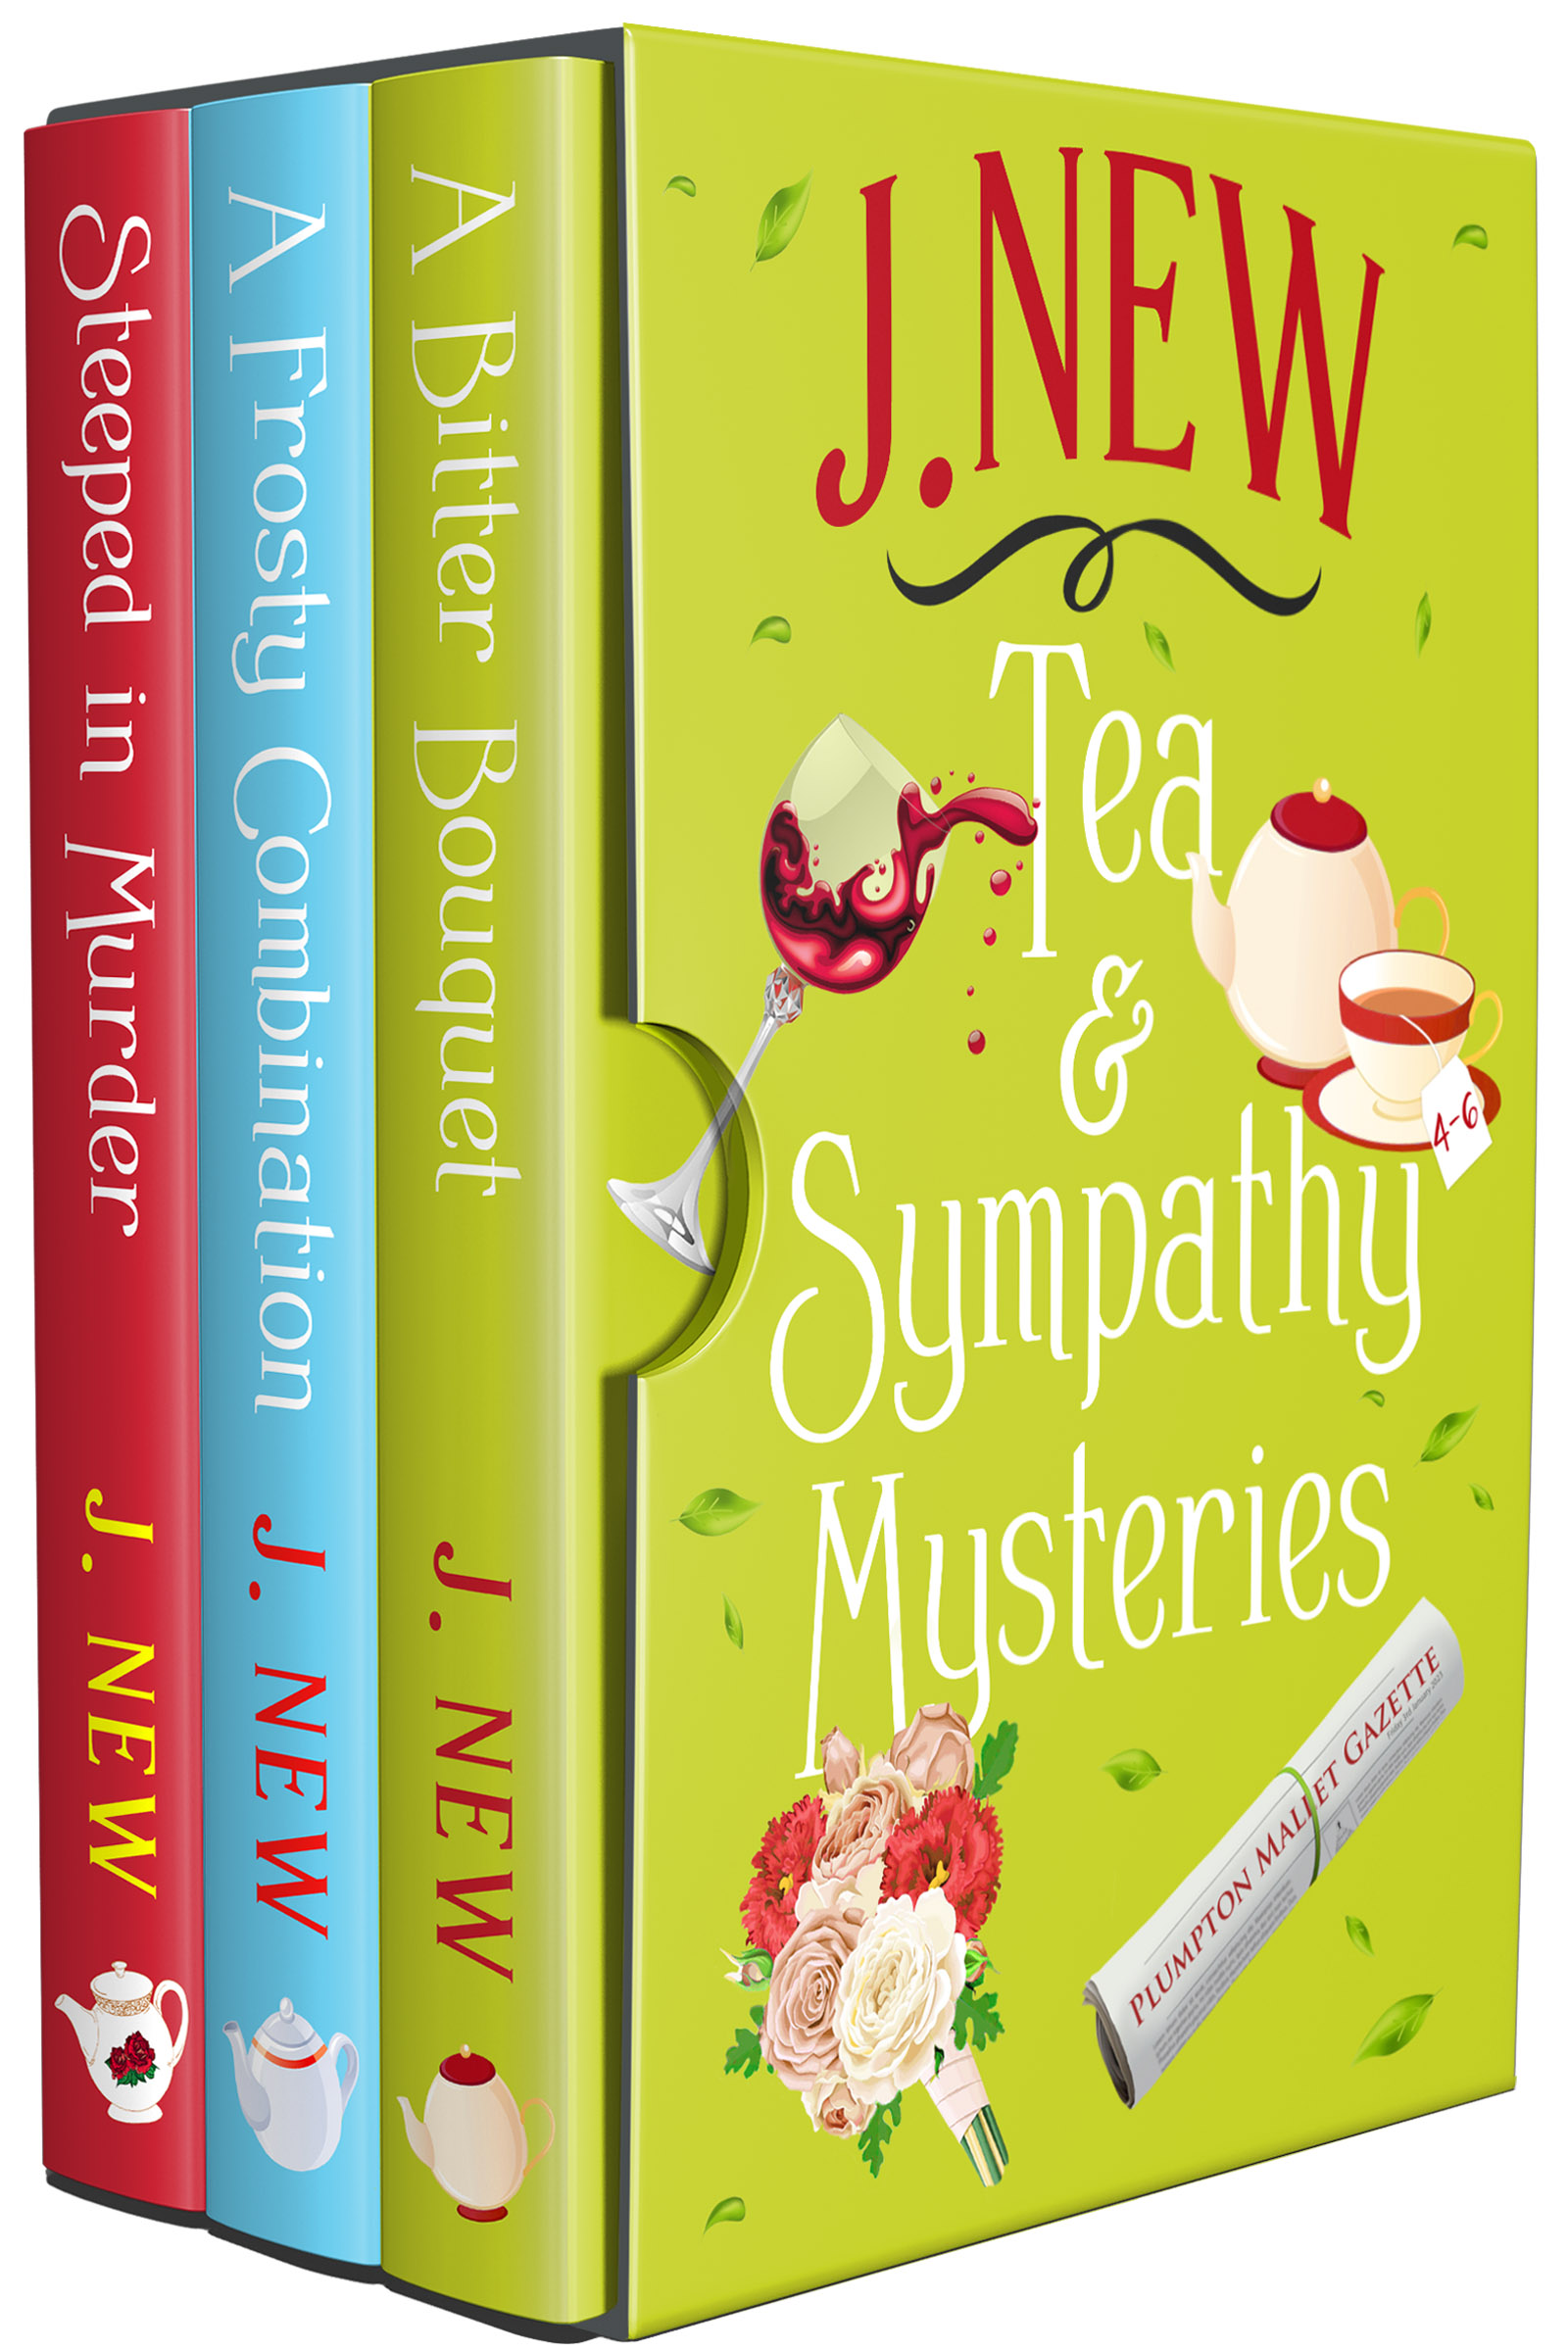 Tea and Sympathy Omnibus, books 4, 5 and 6 in the hugely popular British Cozy culinary mystery series by British author J. New